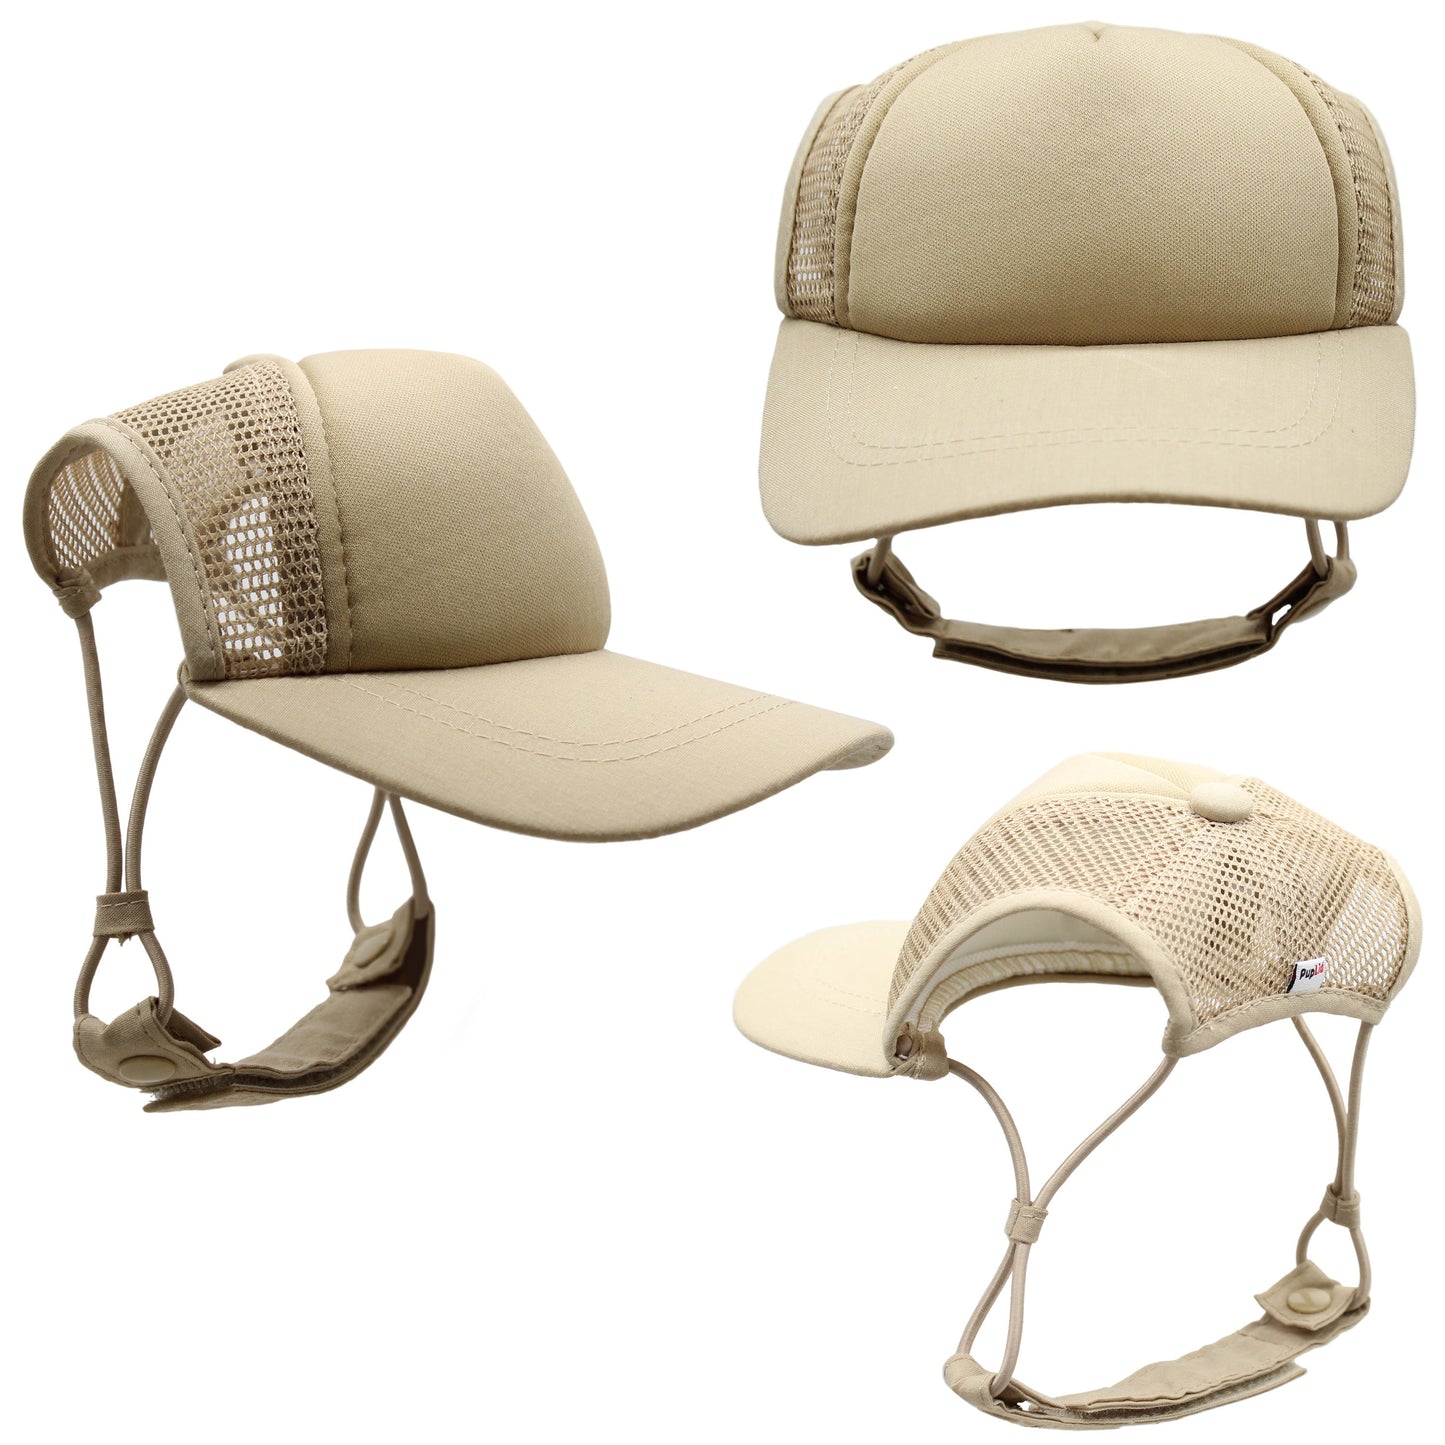 Blank PupLid Trucker Hats - Matching Human Hat - All Colors